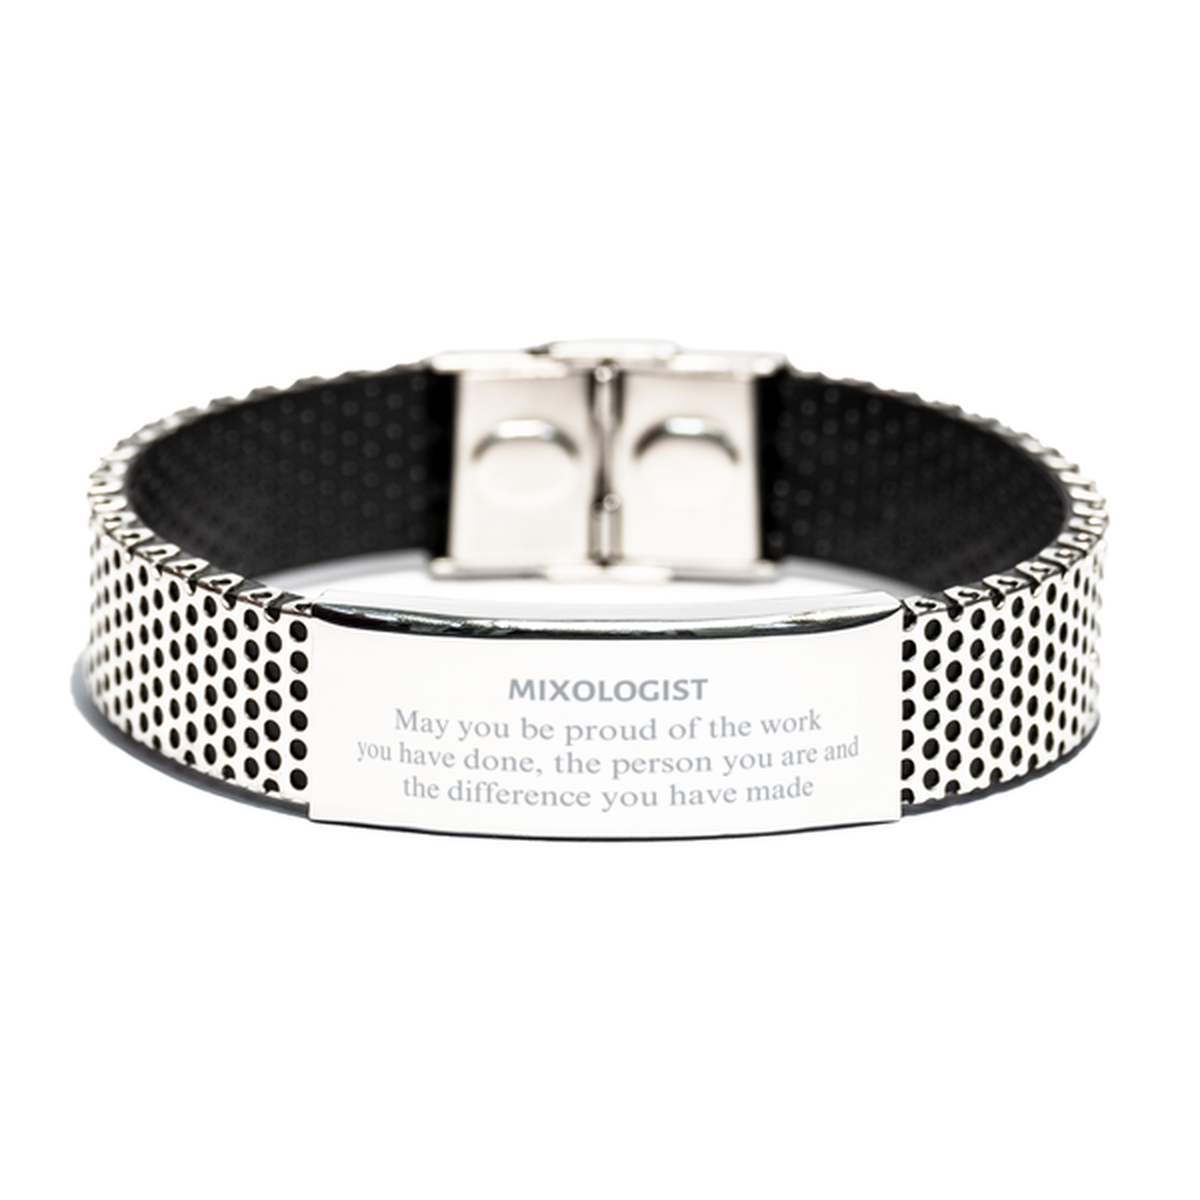 Mixologist May you be proud of the work you have done, Retirement Mixologist Stainless Steel Bracelet for Colleague Appreciation Gifts Amazing for Mixologist